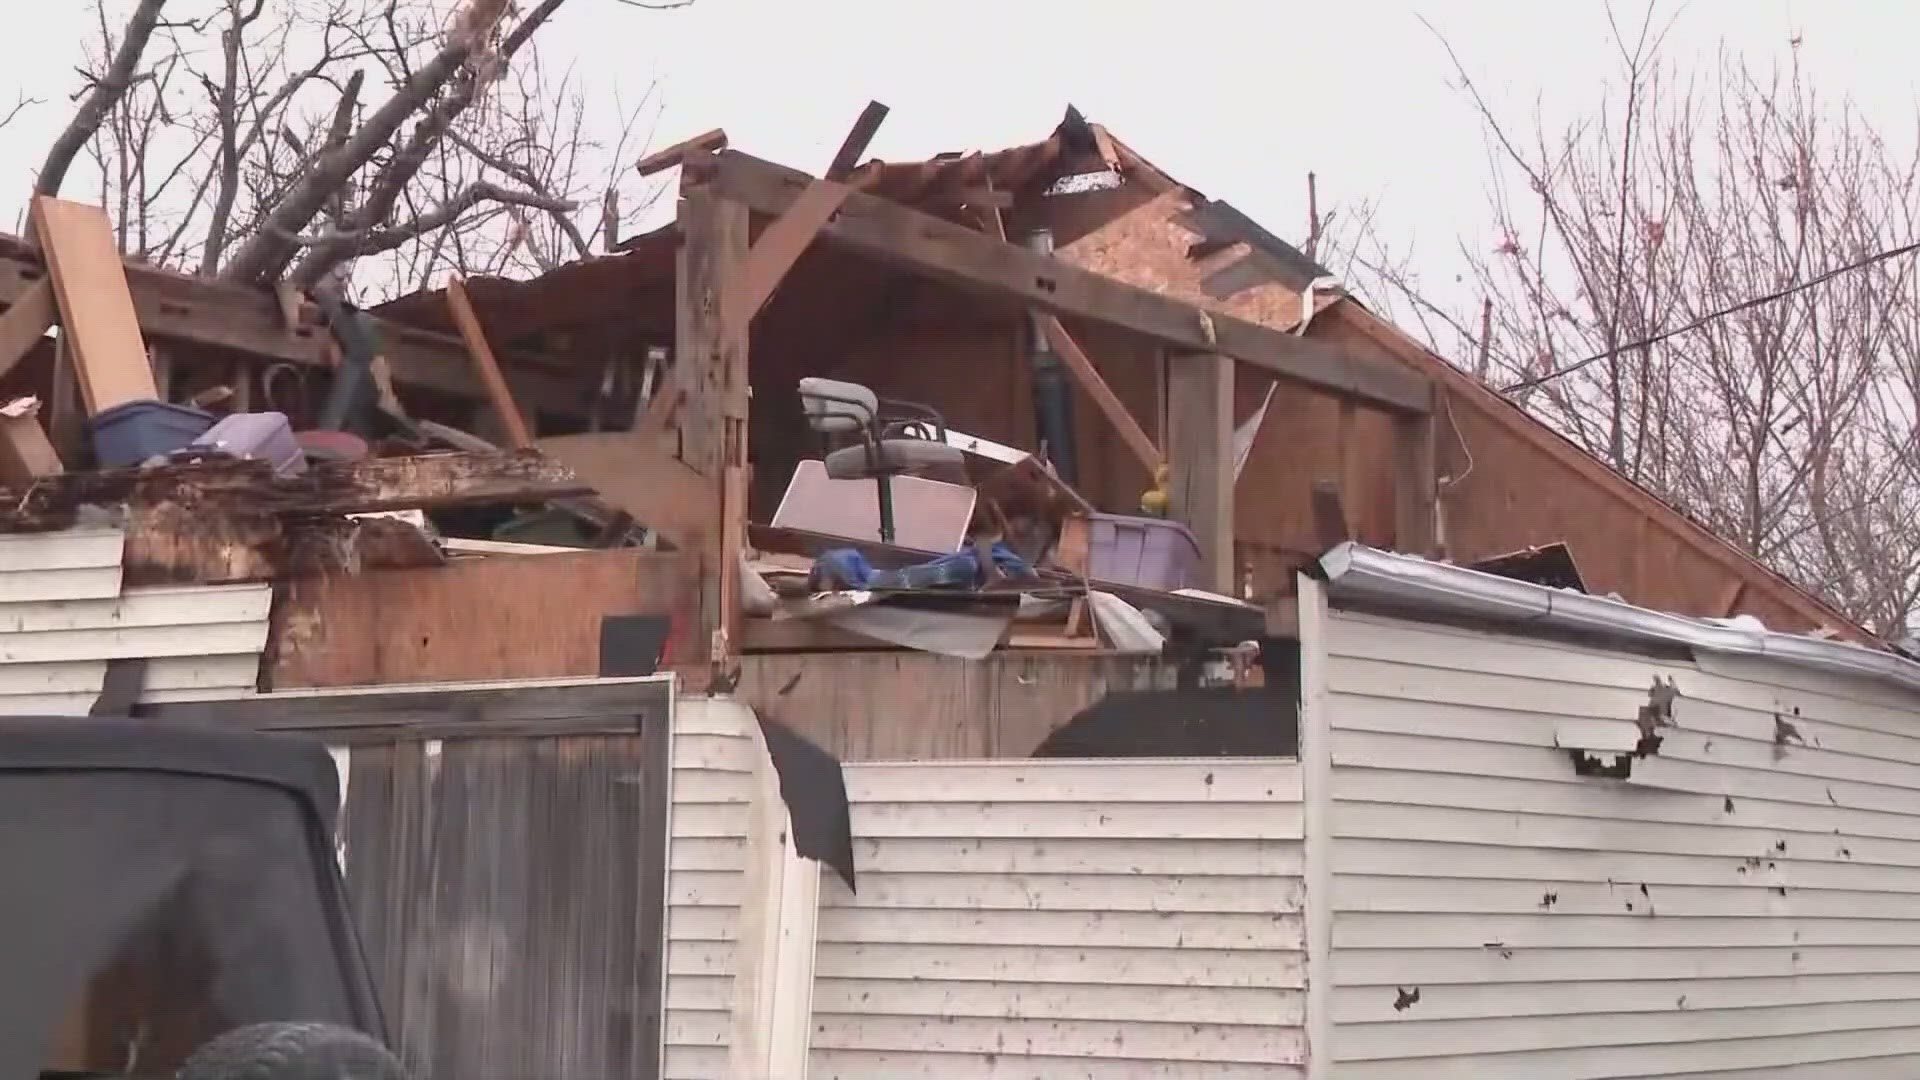 FEMA arrived in central Ohio to get a look at the damage done by the March 14 tornadoes.